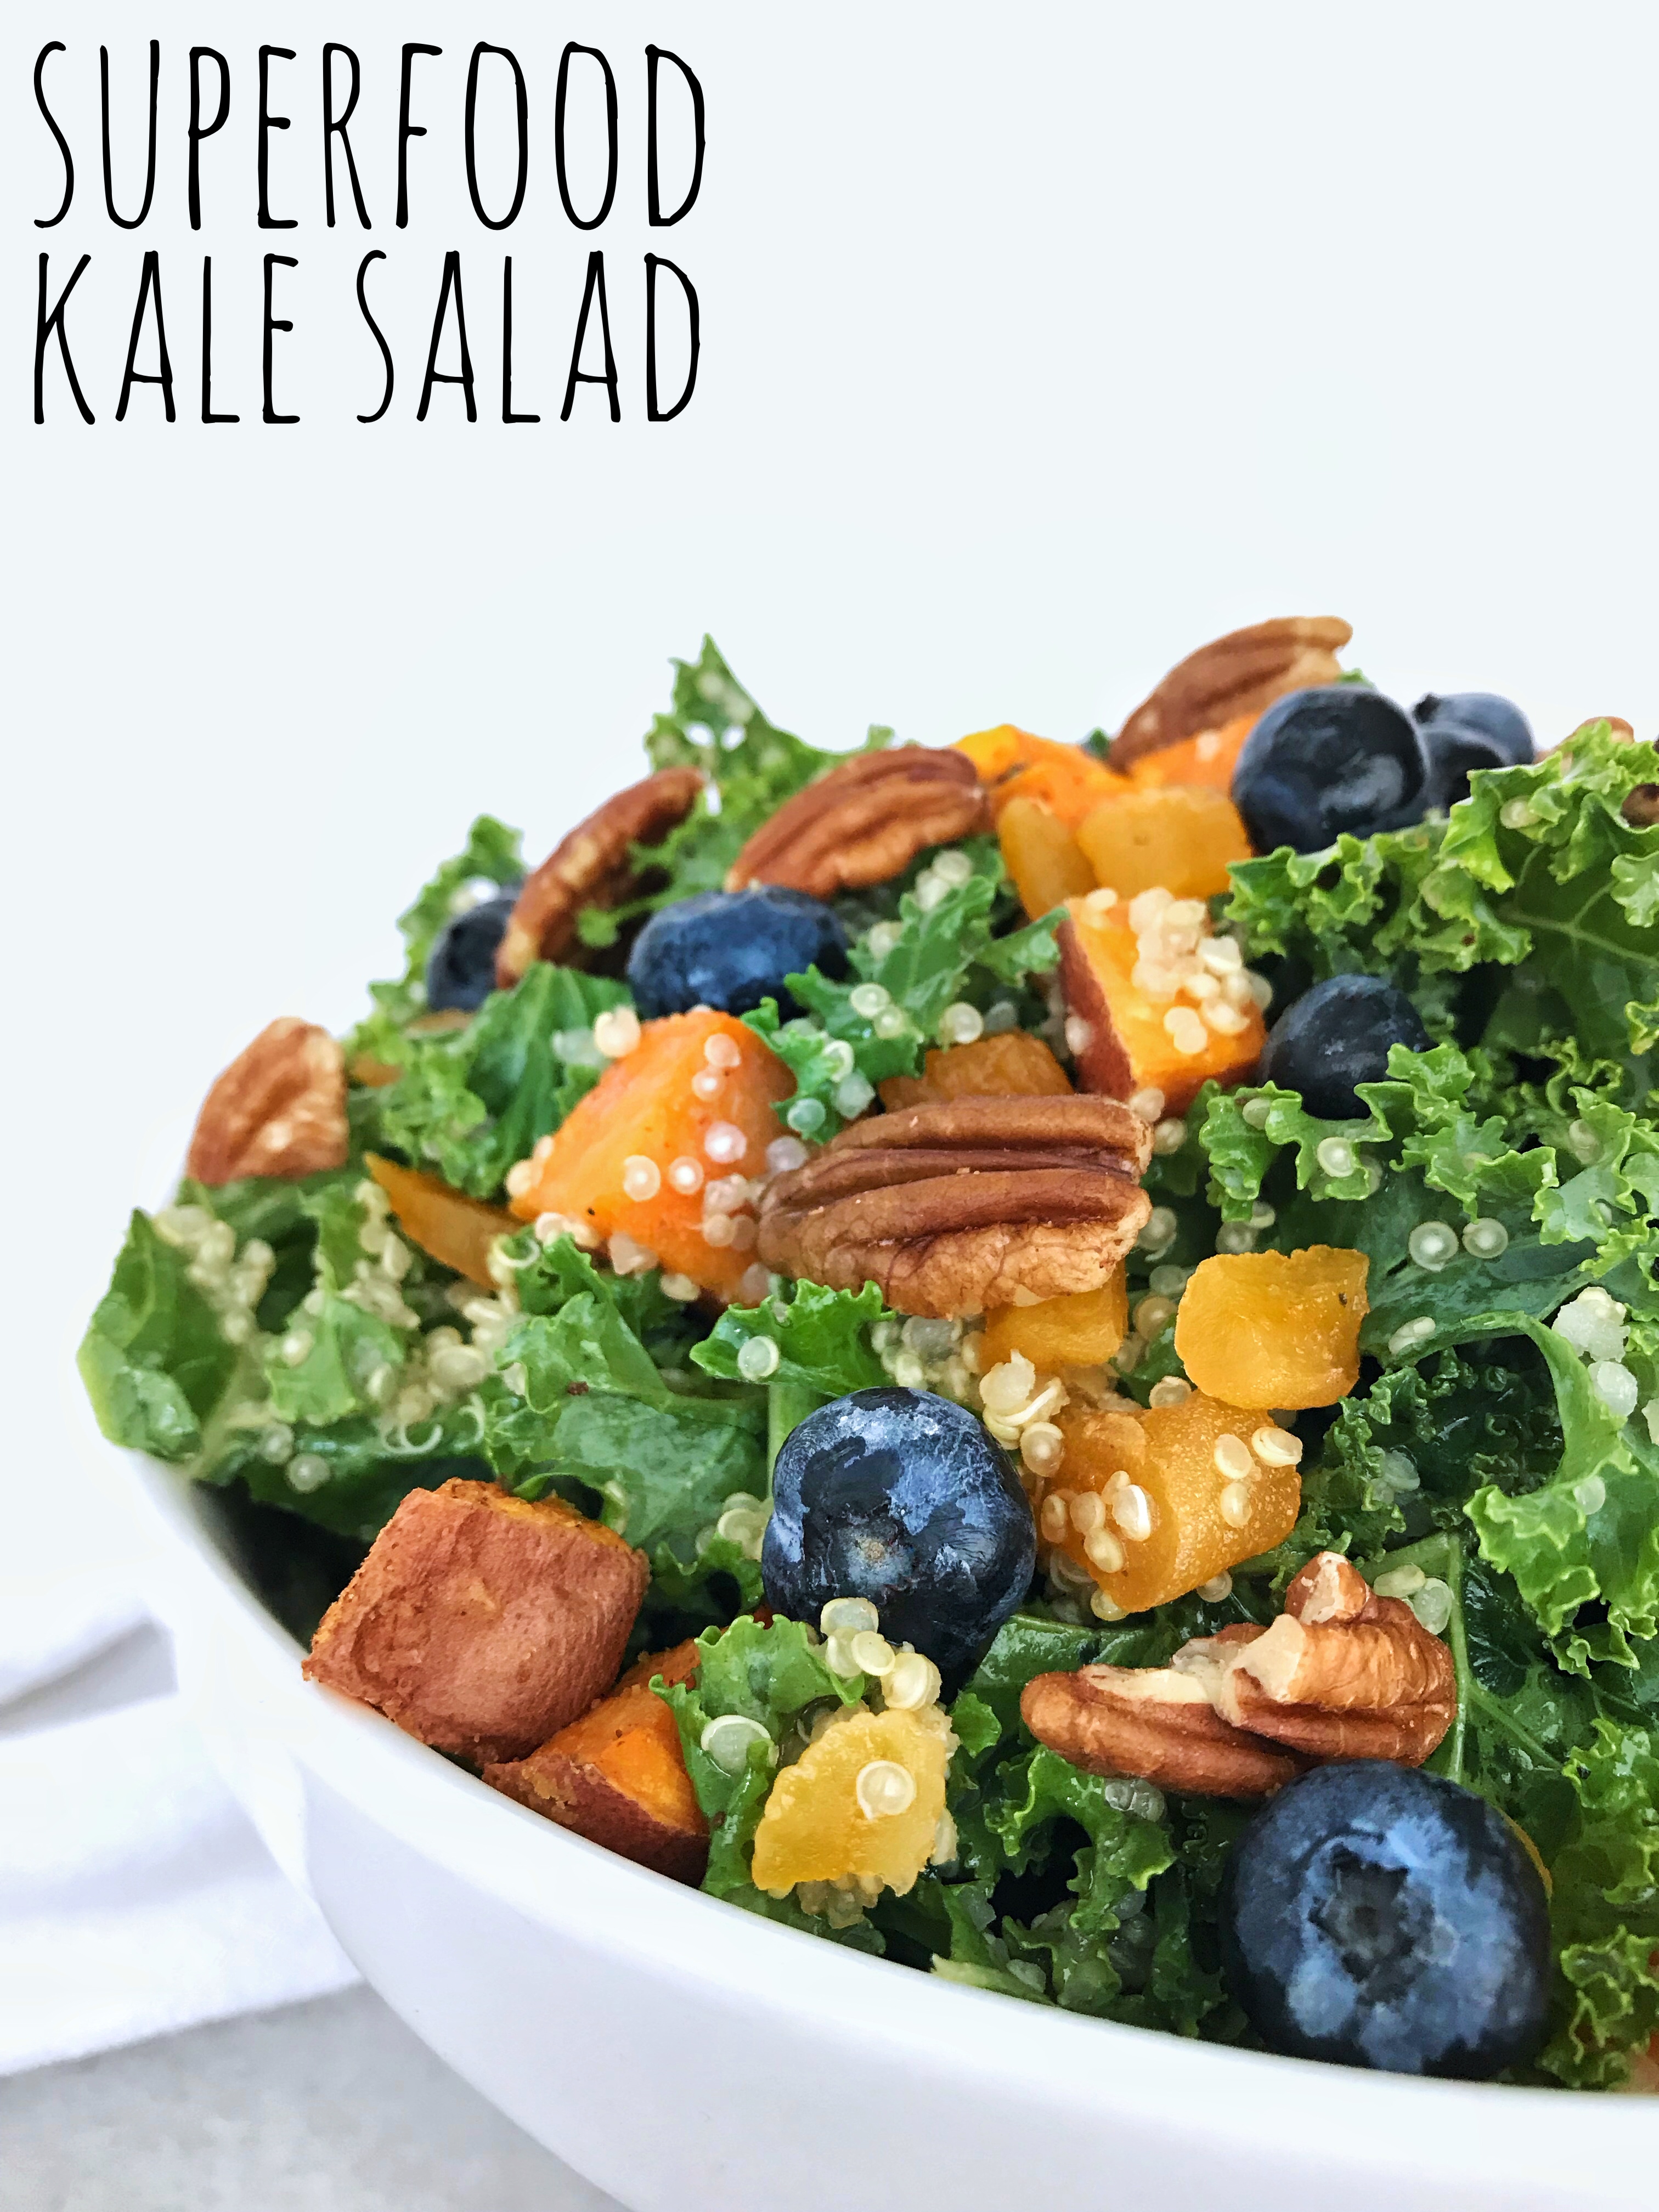 Try our Superfood Kale salad tossed with blueberries, pecans, sweet potatoes, apricots and quinoa